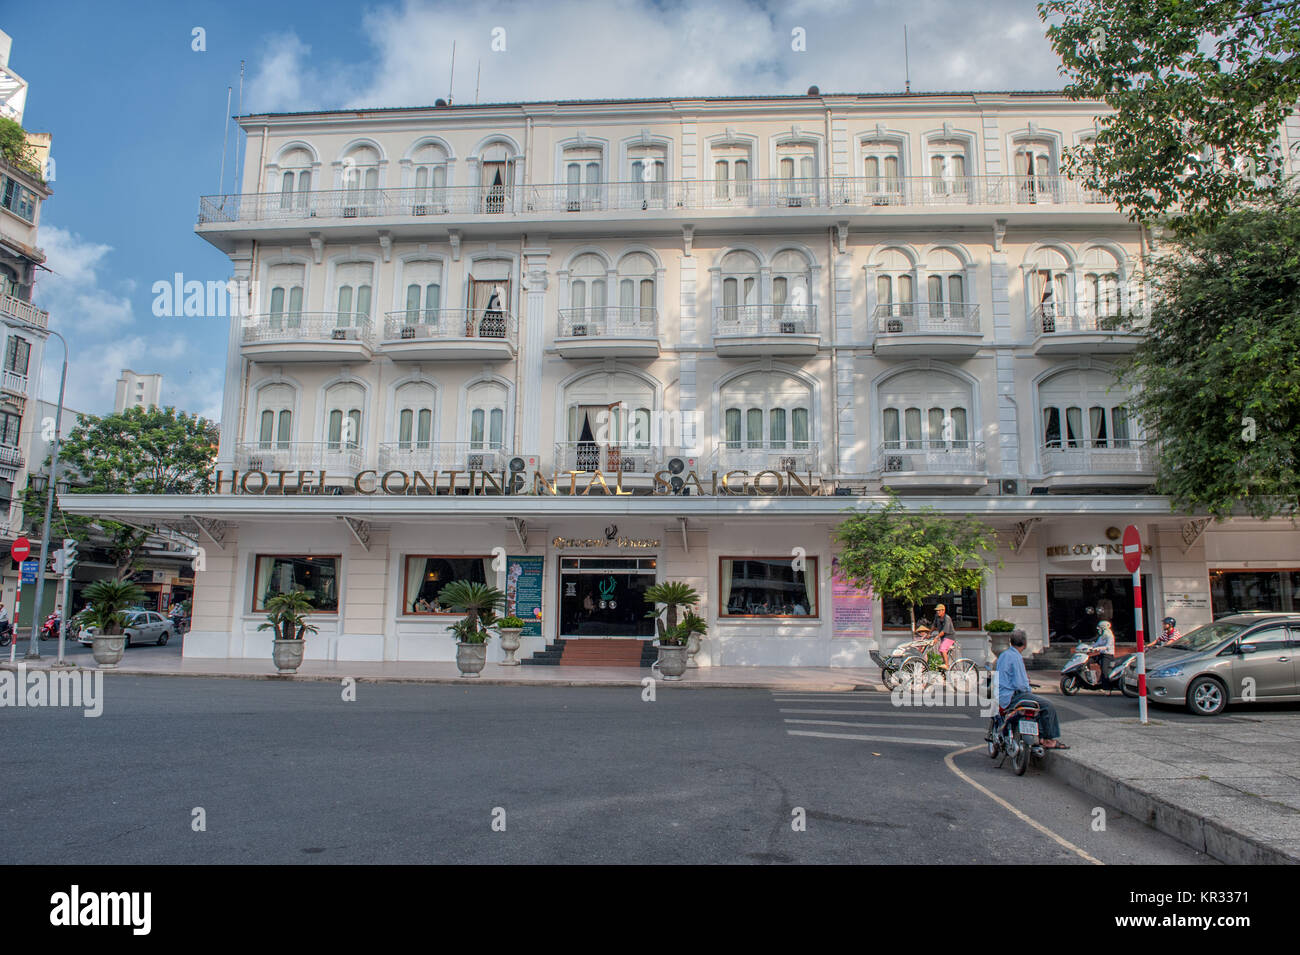 Legendary Hotel Continental in Saigon. This famous hotel has been a hangout for war correspondents and Graham Green wrote “The Quiet American” here. Stock Photo